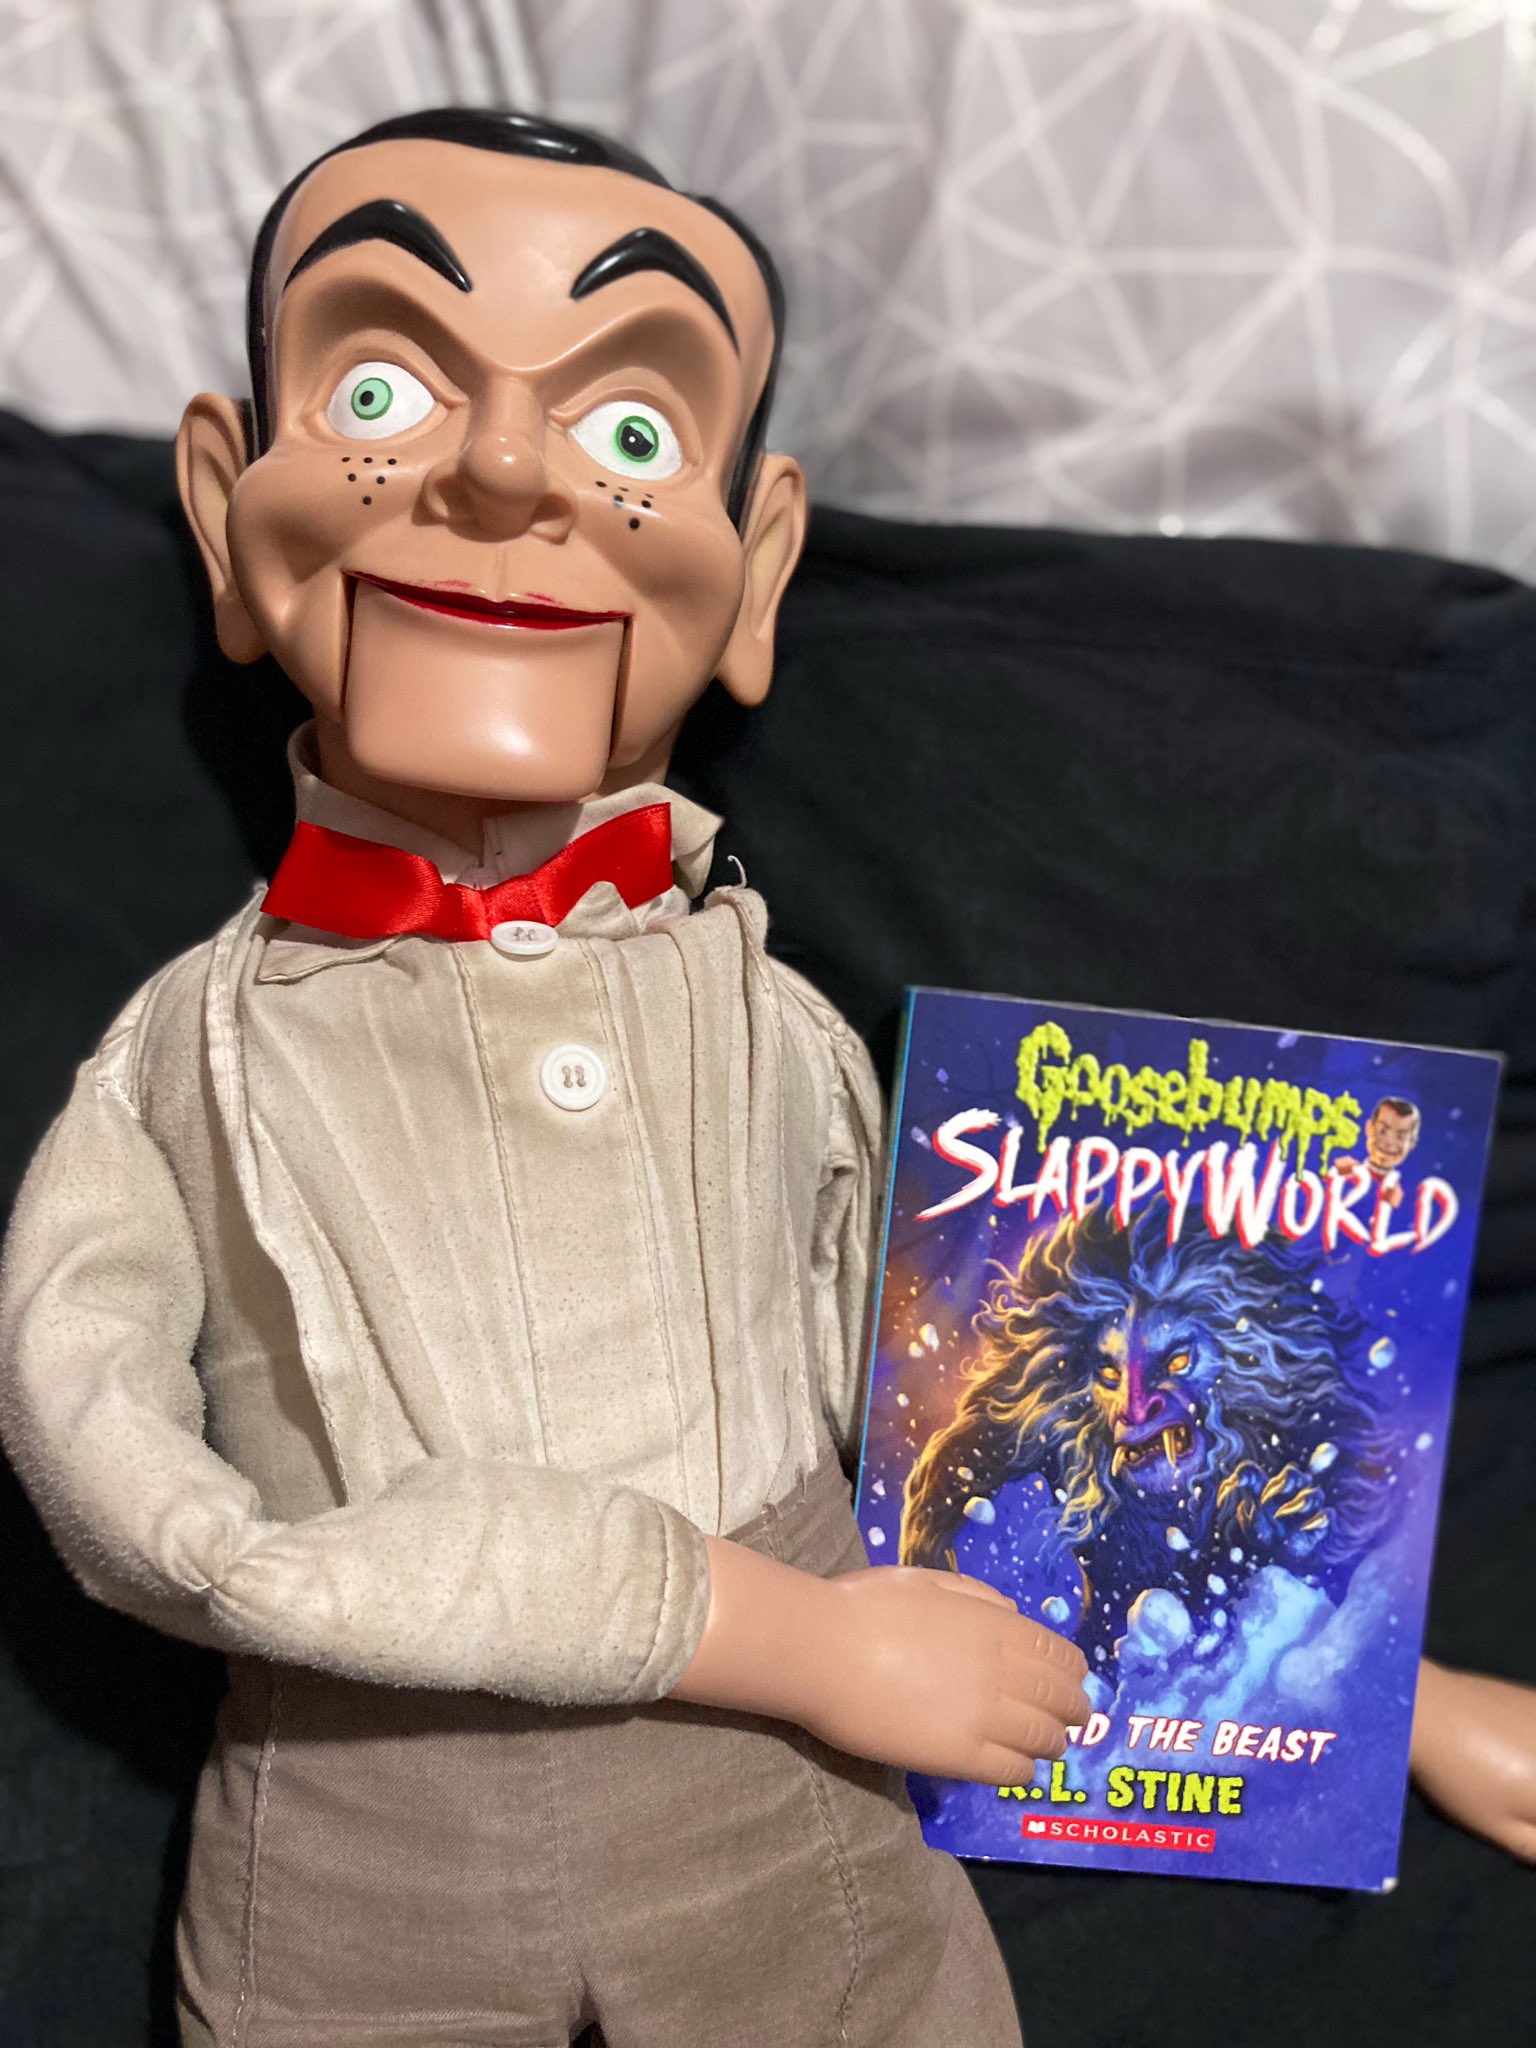  Happy Birthday R.L Stine!

Thanks for all the Goosebumps!       